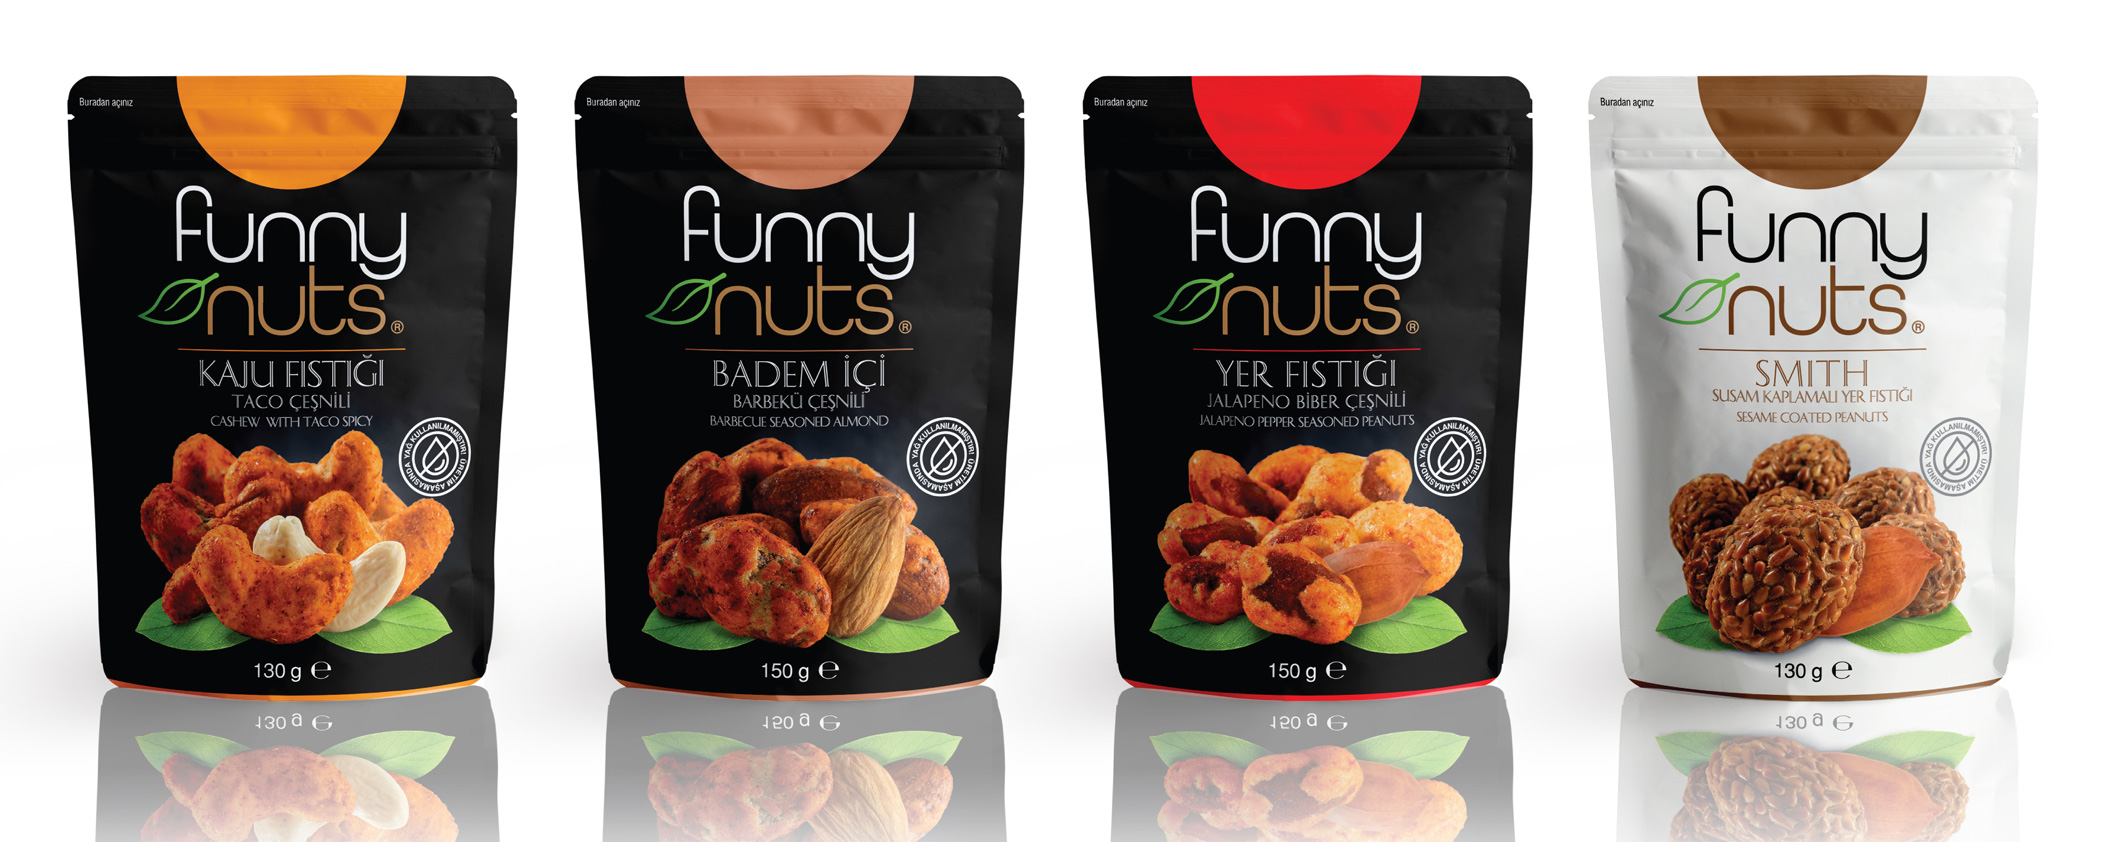 Healthy Snacks ‘Funny Nuts’ Packaging Design